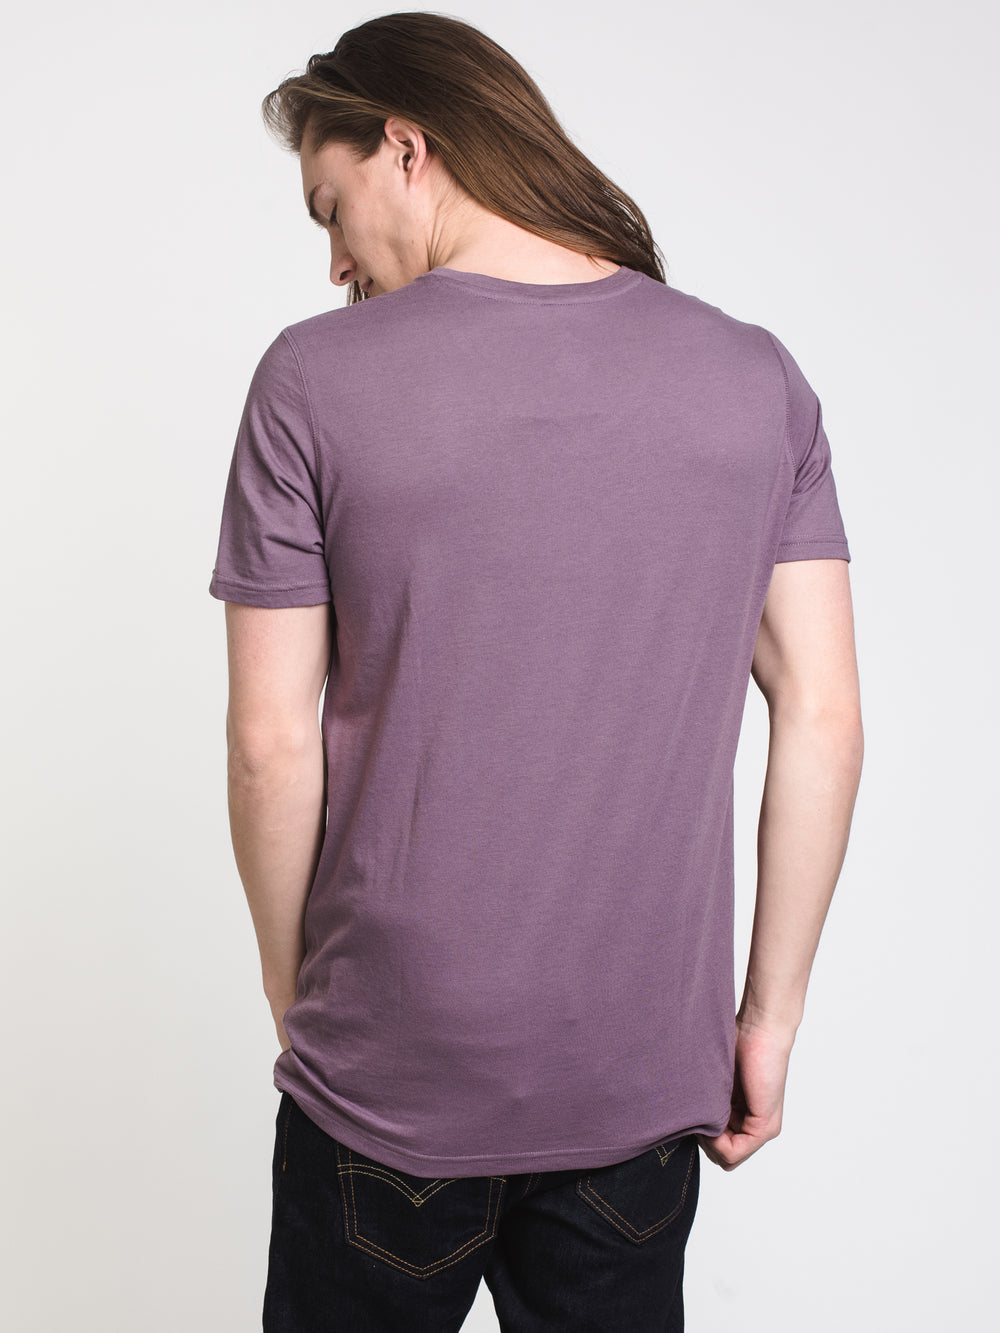 MENS VICTOR VNECK T - LILAC - CLEARANCE